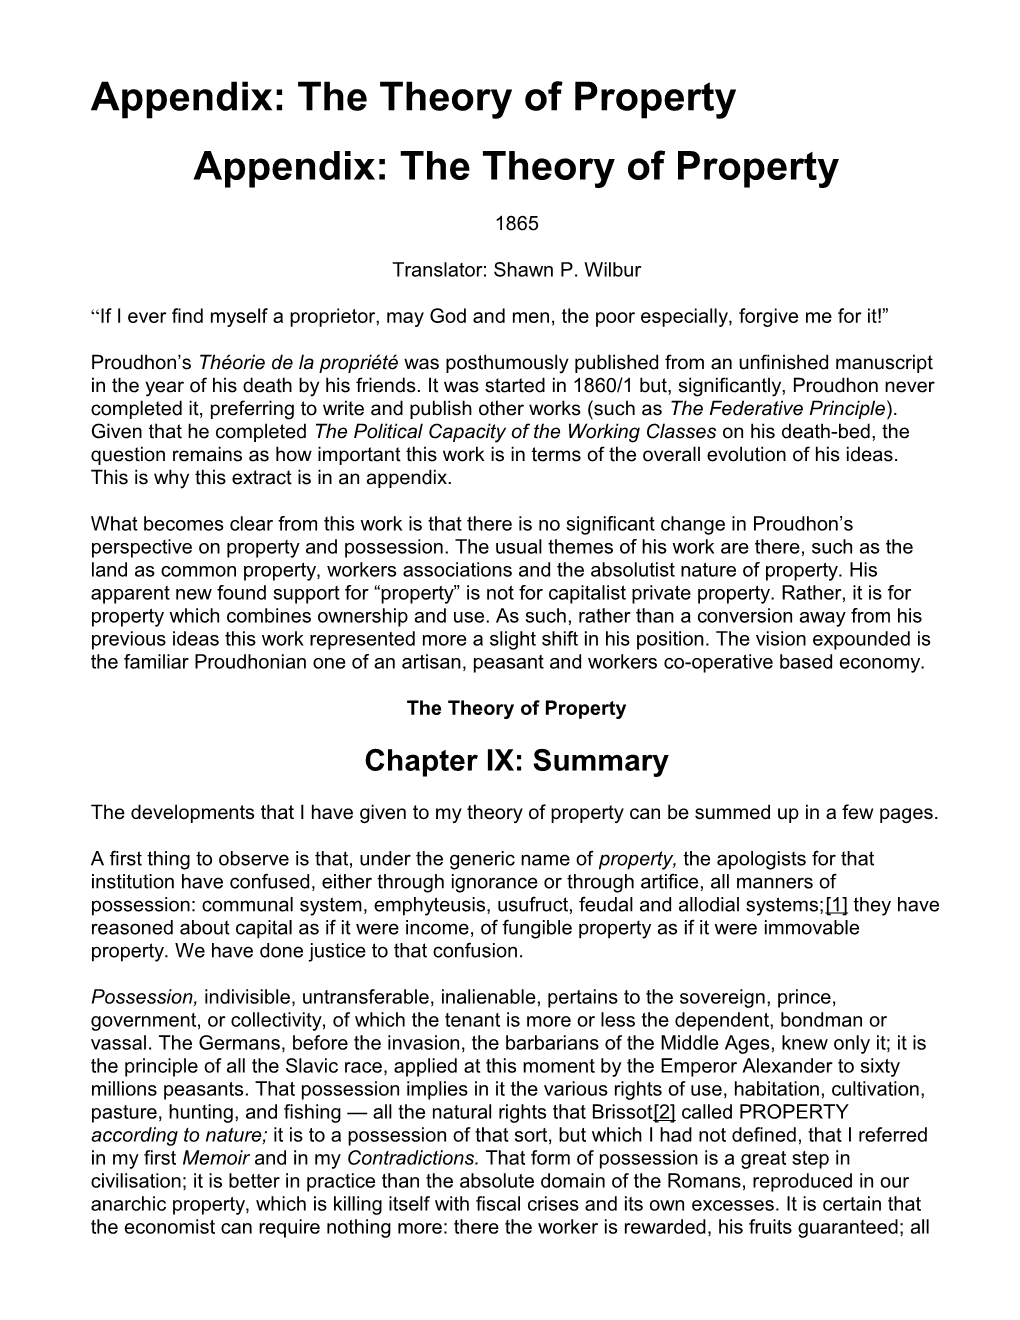 Appendix: the Theory of Property